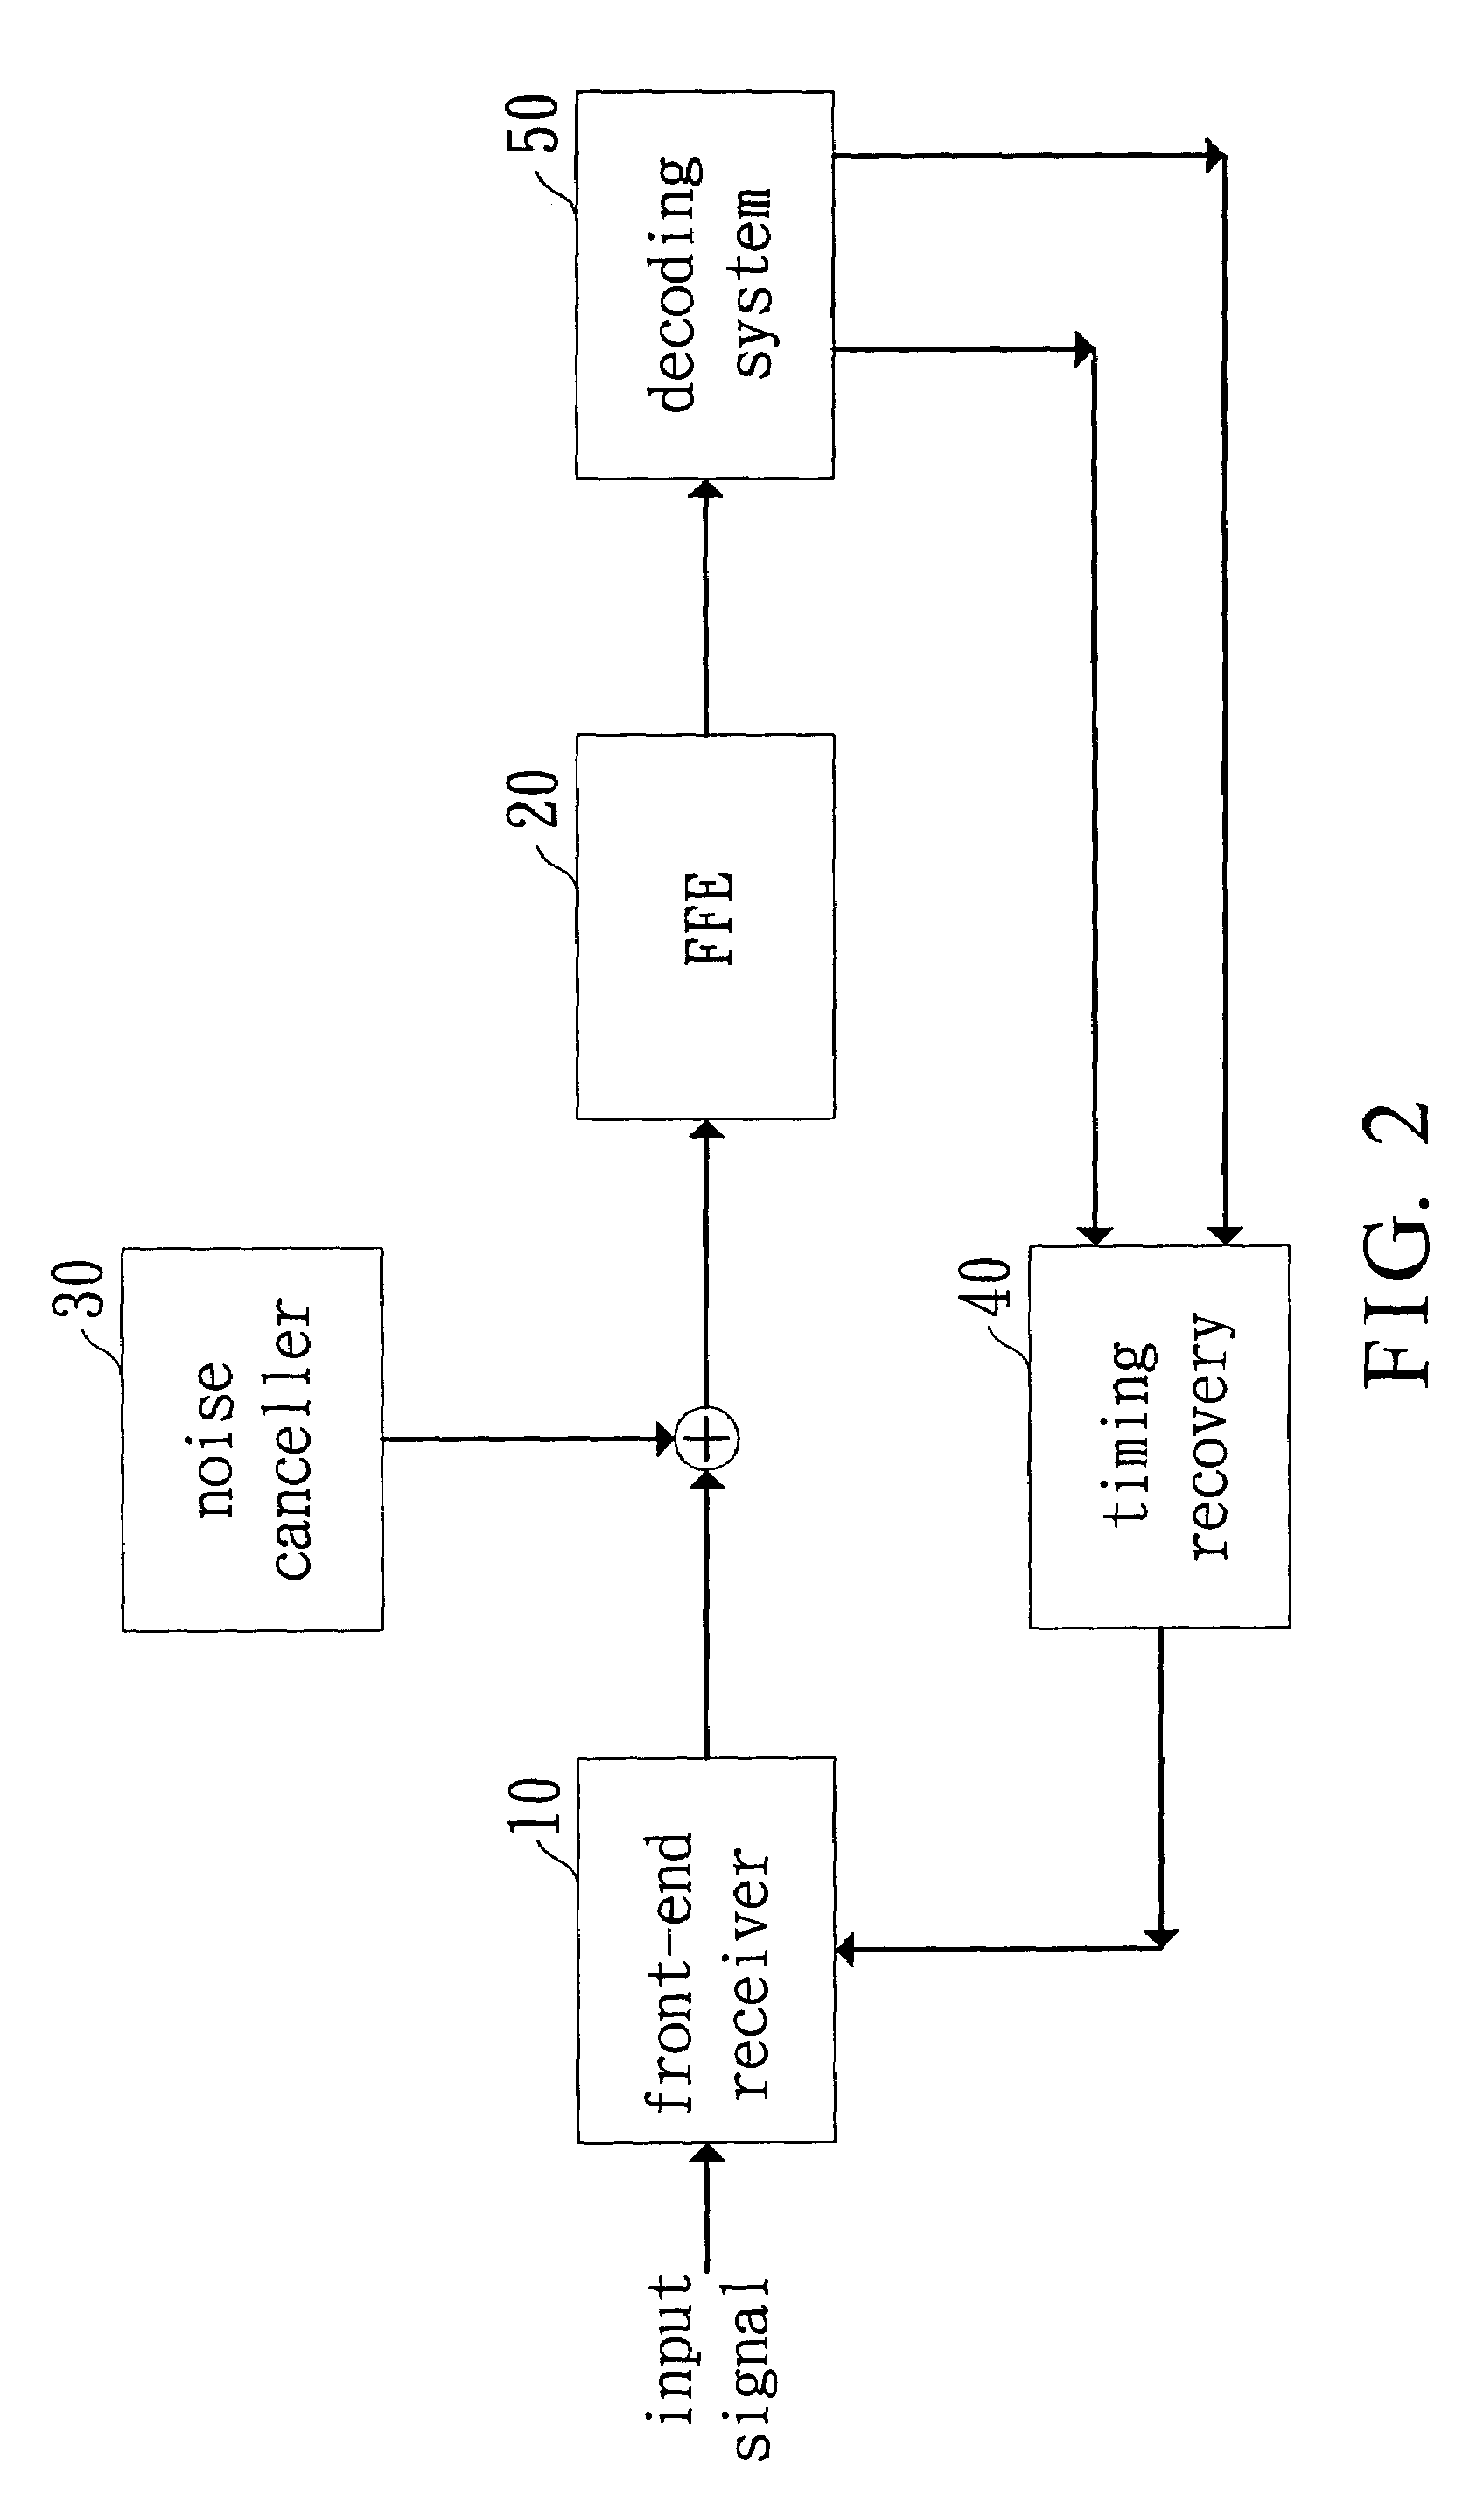 Demodulation apparatus for a network transceiver and method thereof